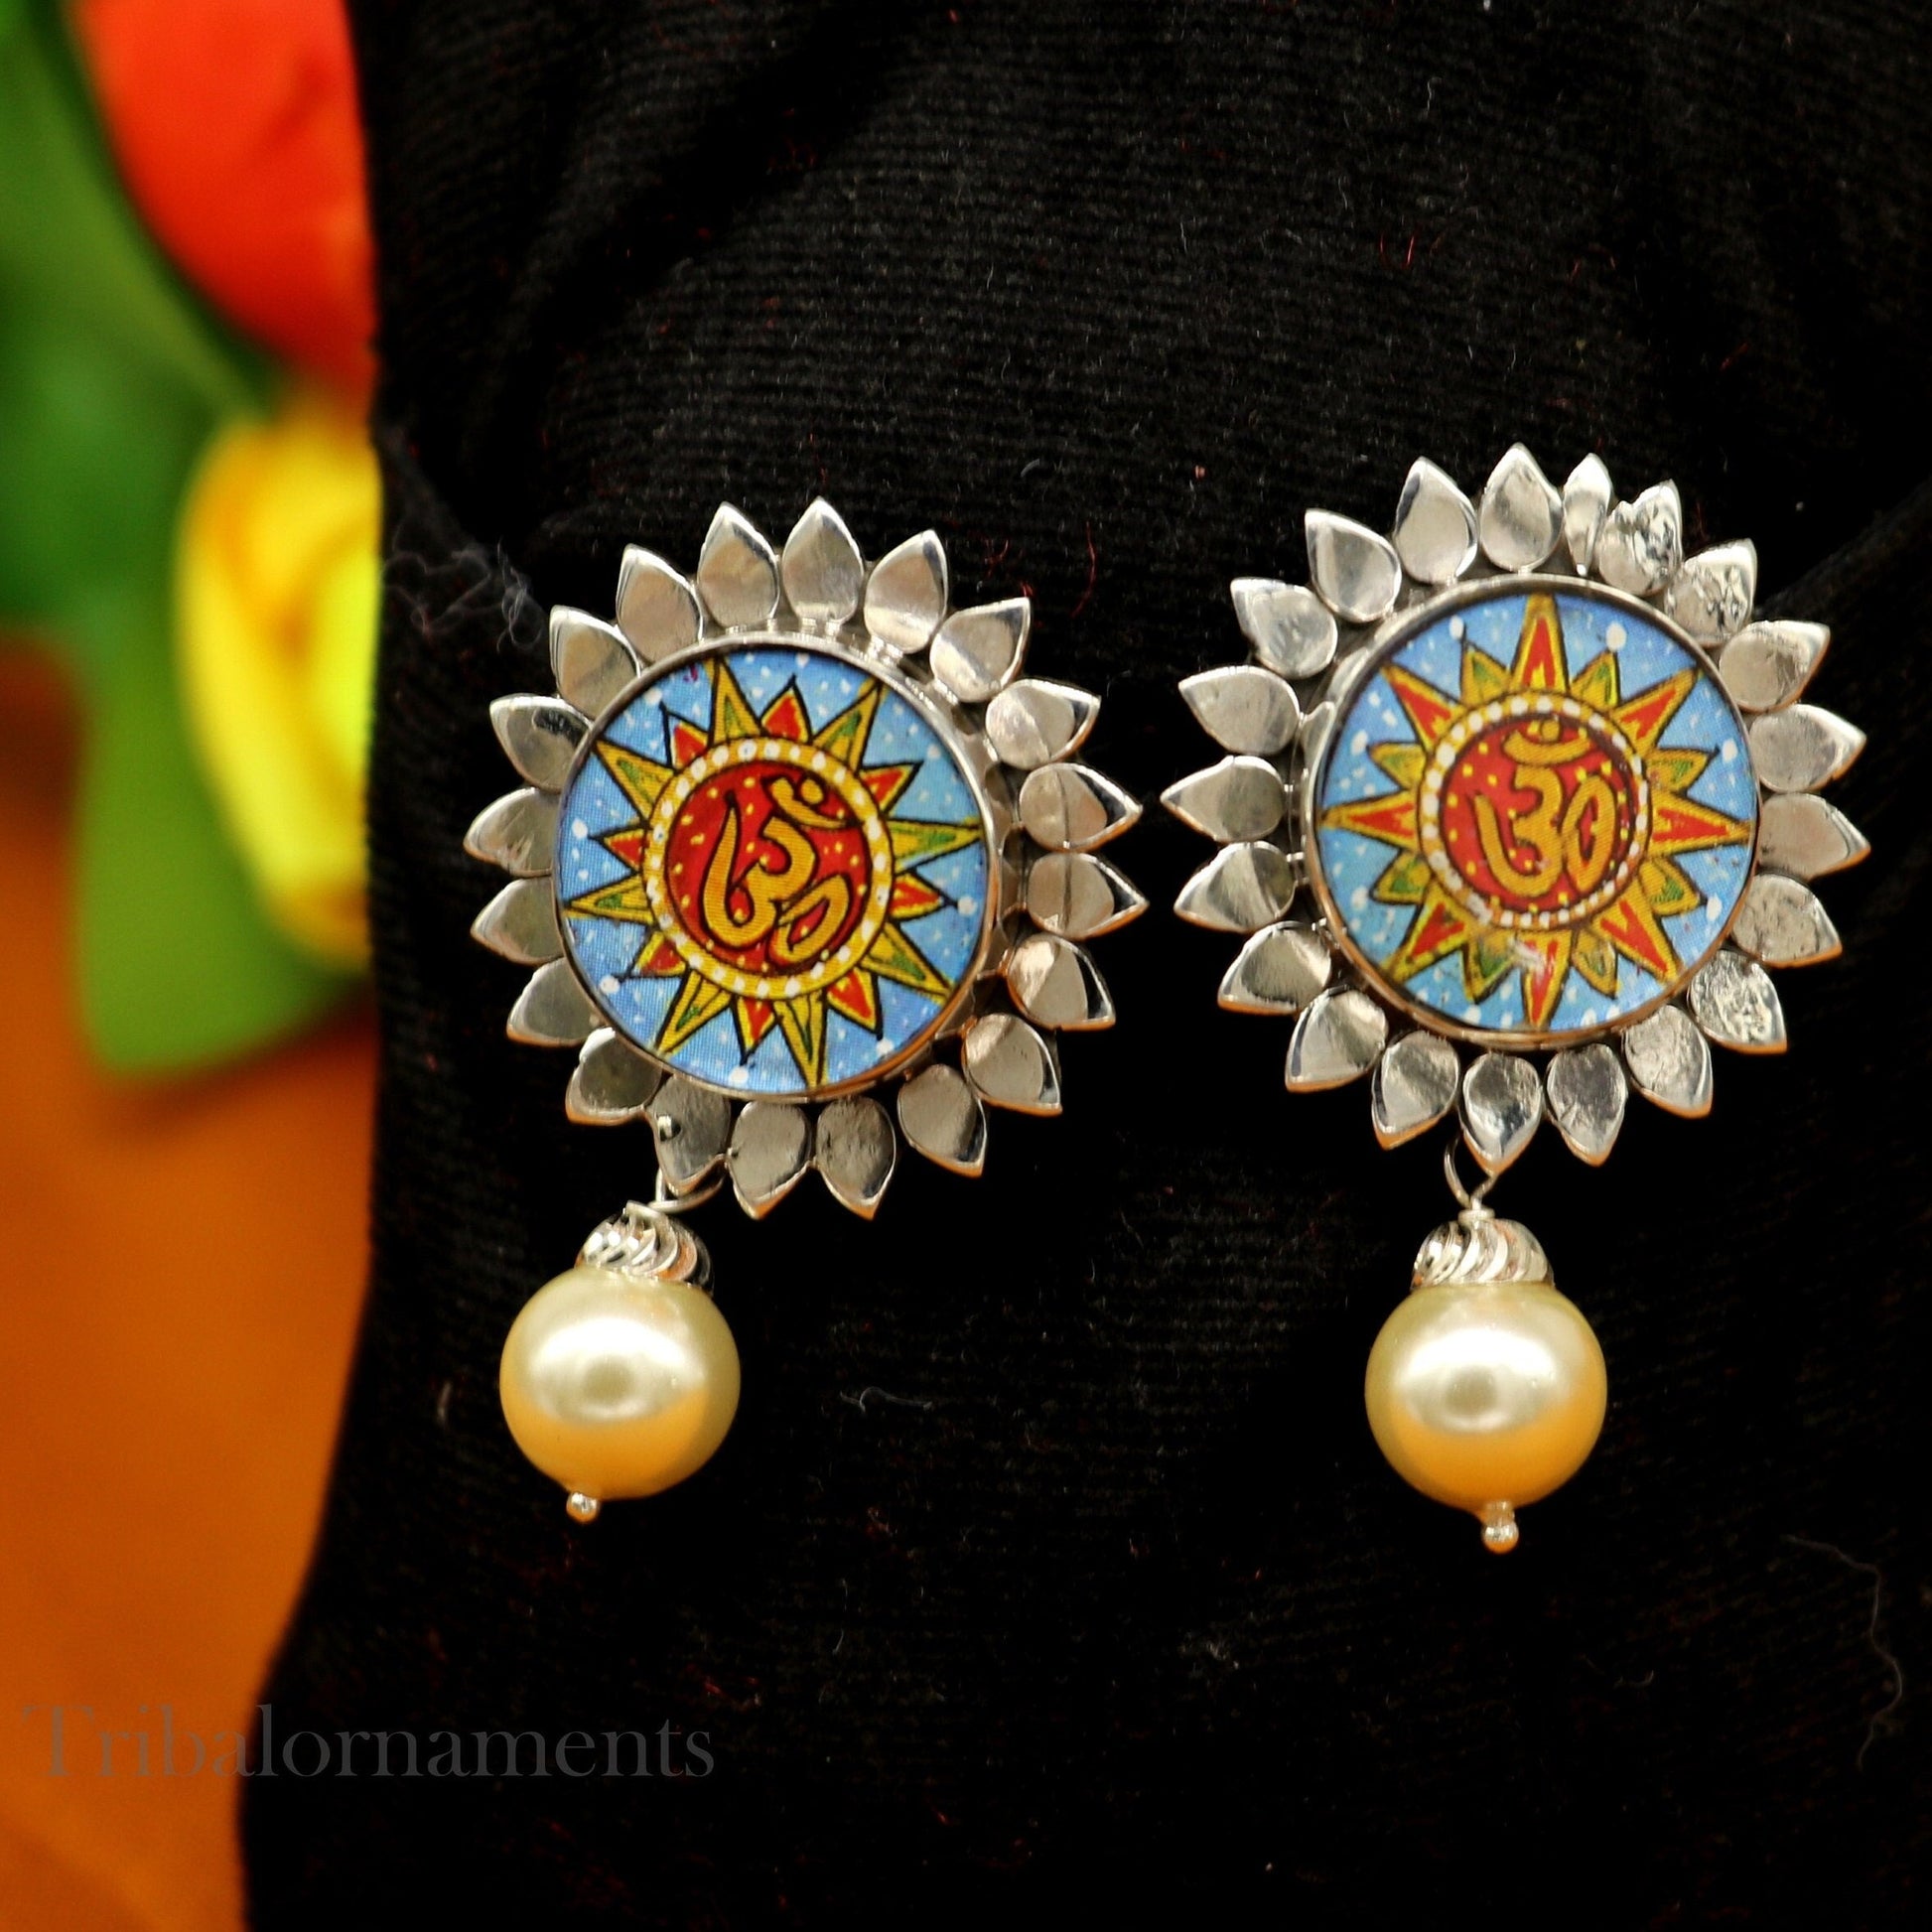 92.5 Sterling Silver Divine Mantra 'om' Aum' Stud earring Hand Painted Miniature Art photo Glass Framed ethnic stylish jewelry ear938 - TRIBAL ORNAMENTS